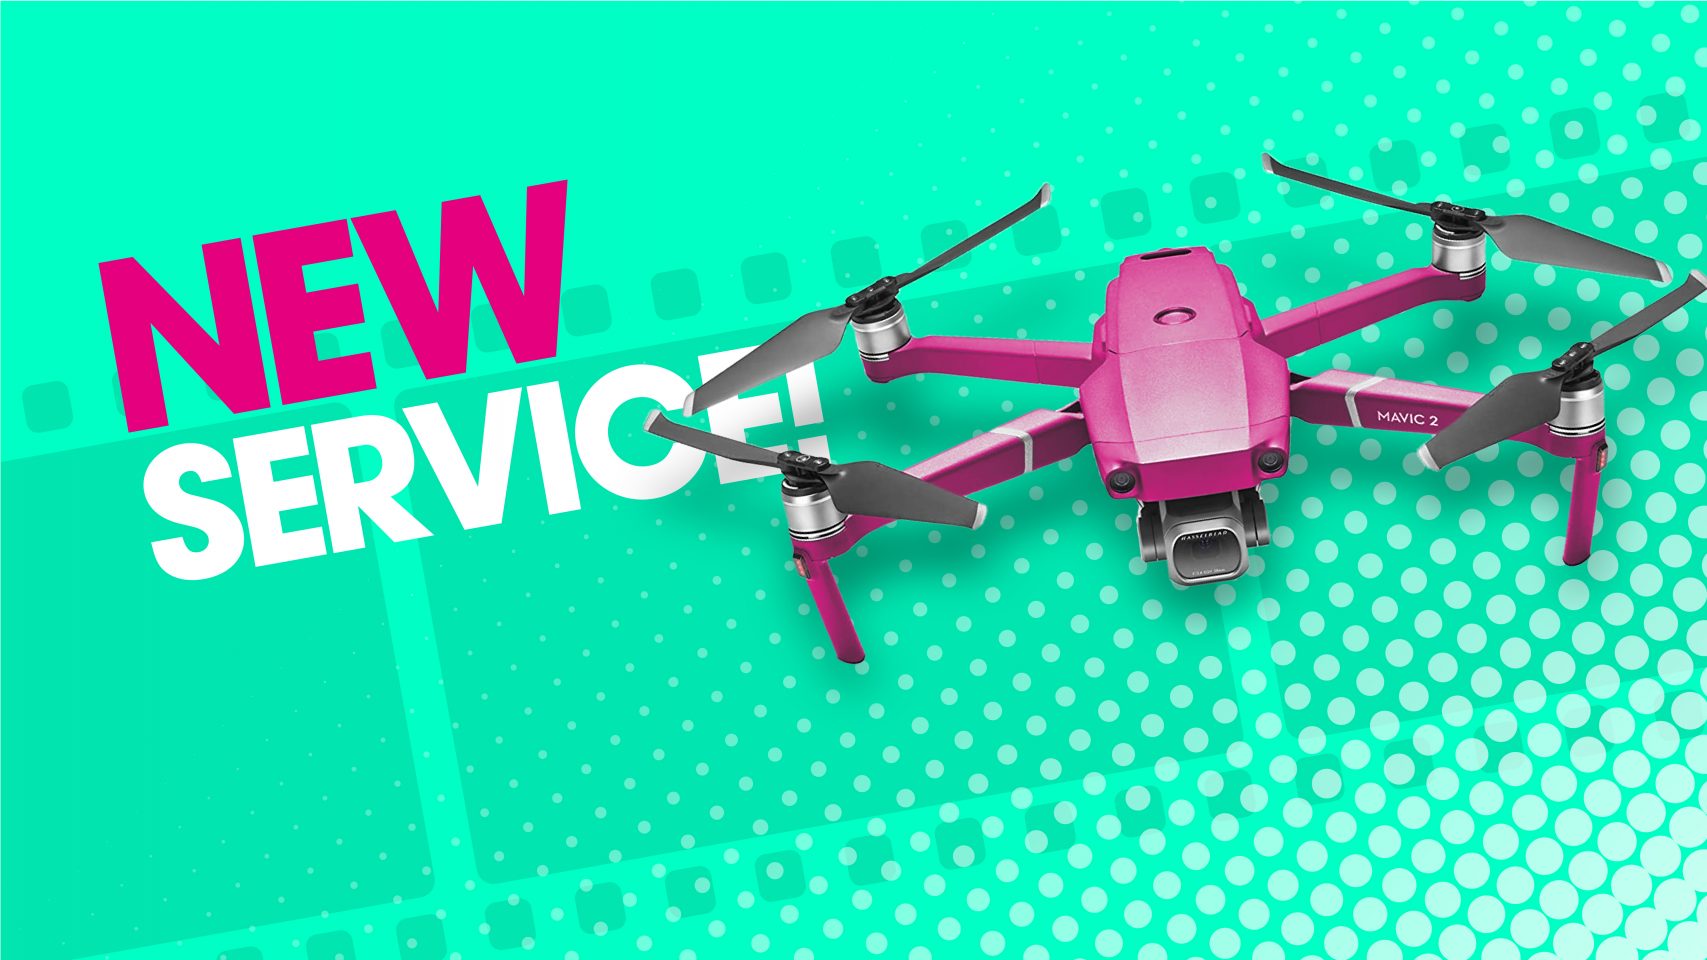 We’ve launched a New Service… Into the Sky – Literally! image